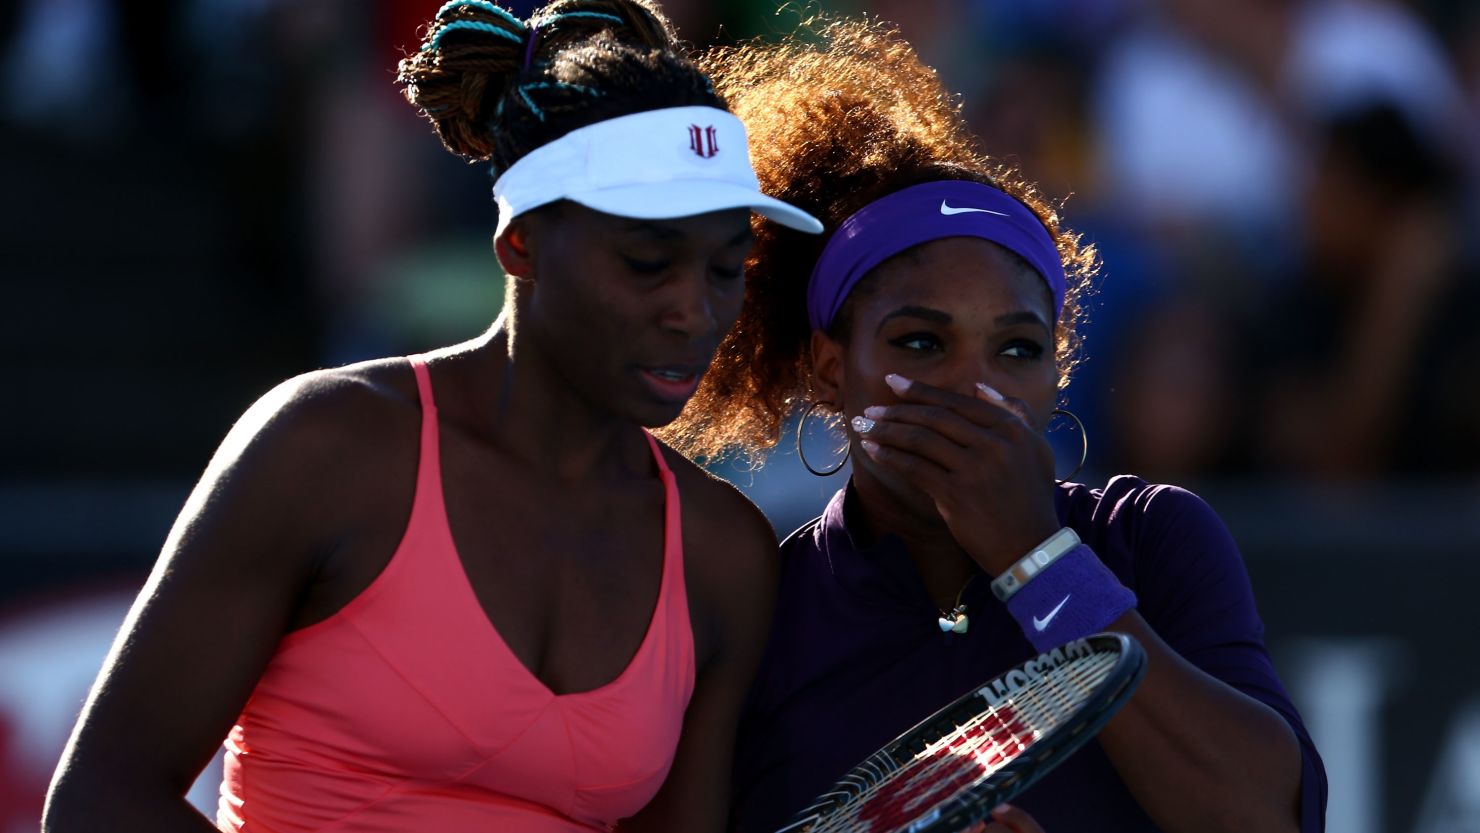 Serena Williams, right, pictured with her sister Venus during a doubles match af the Australian Open in January.